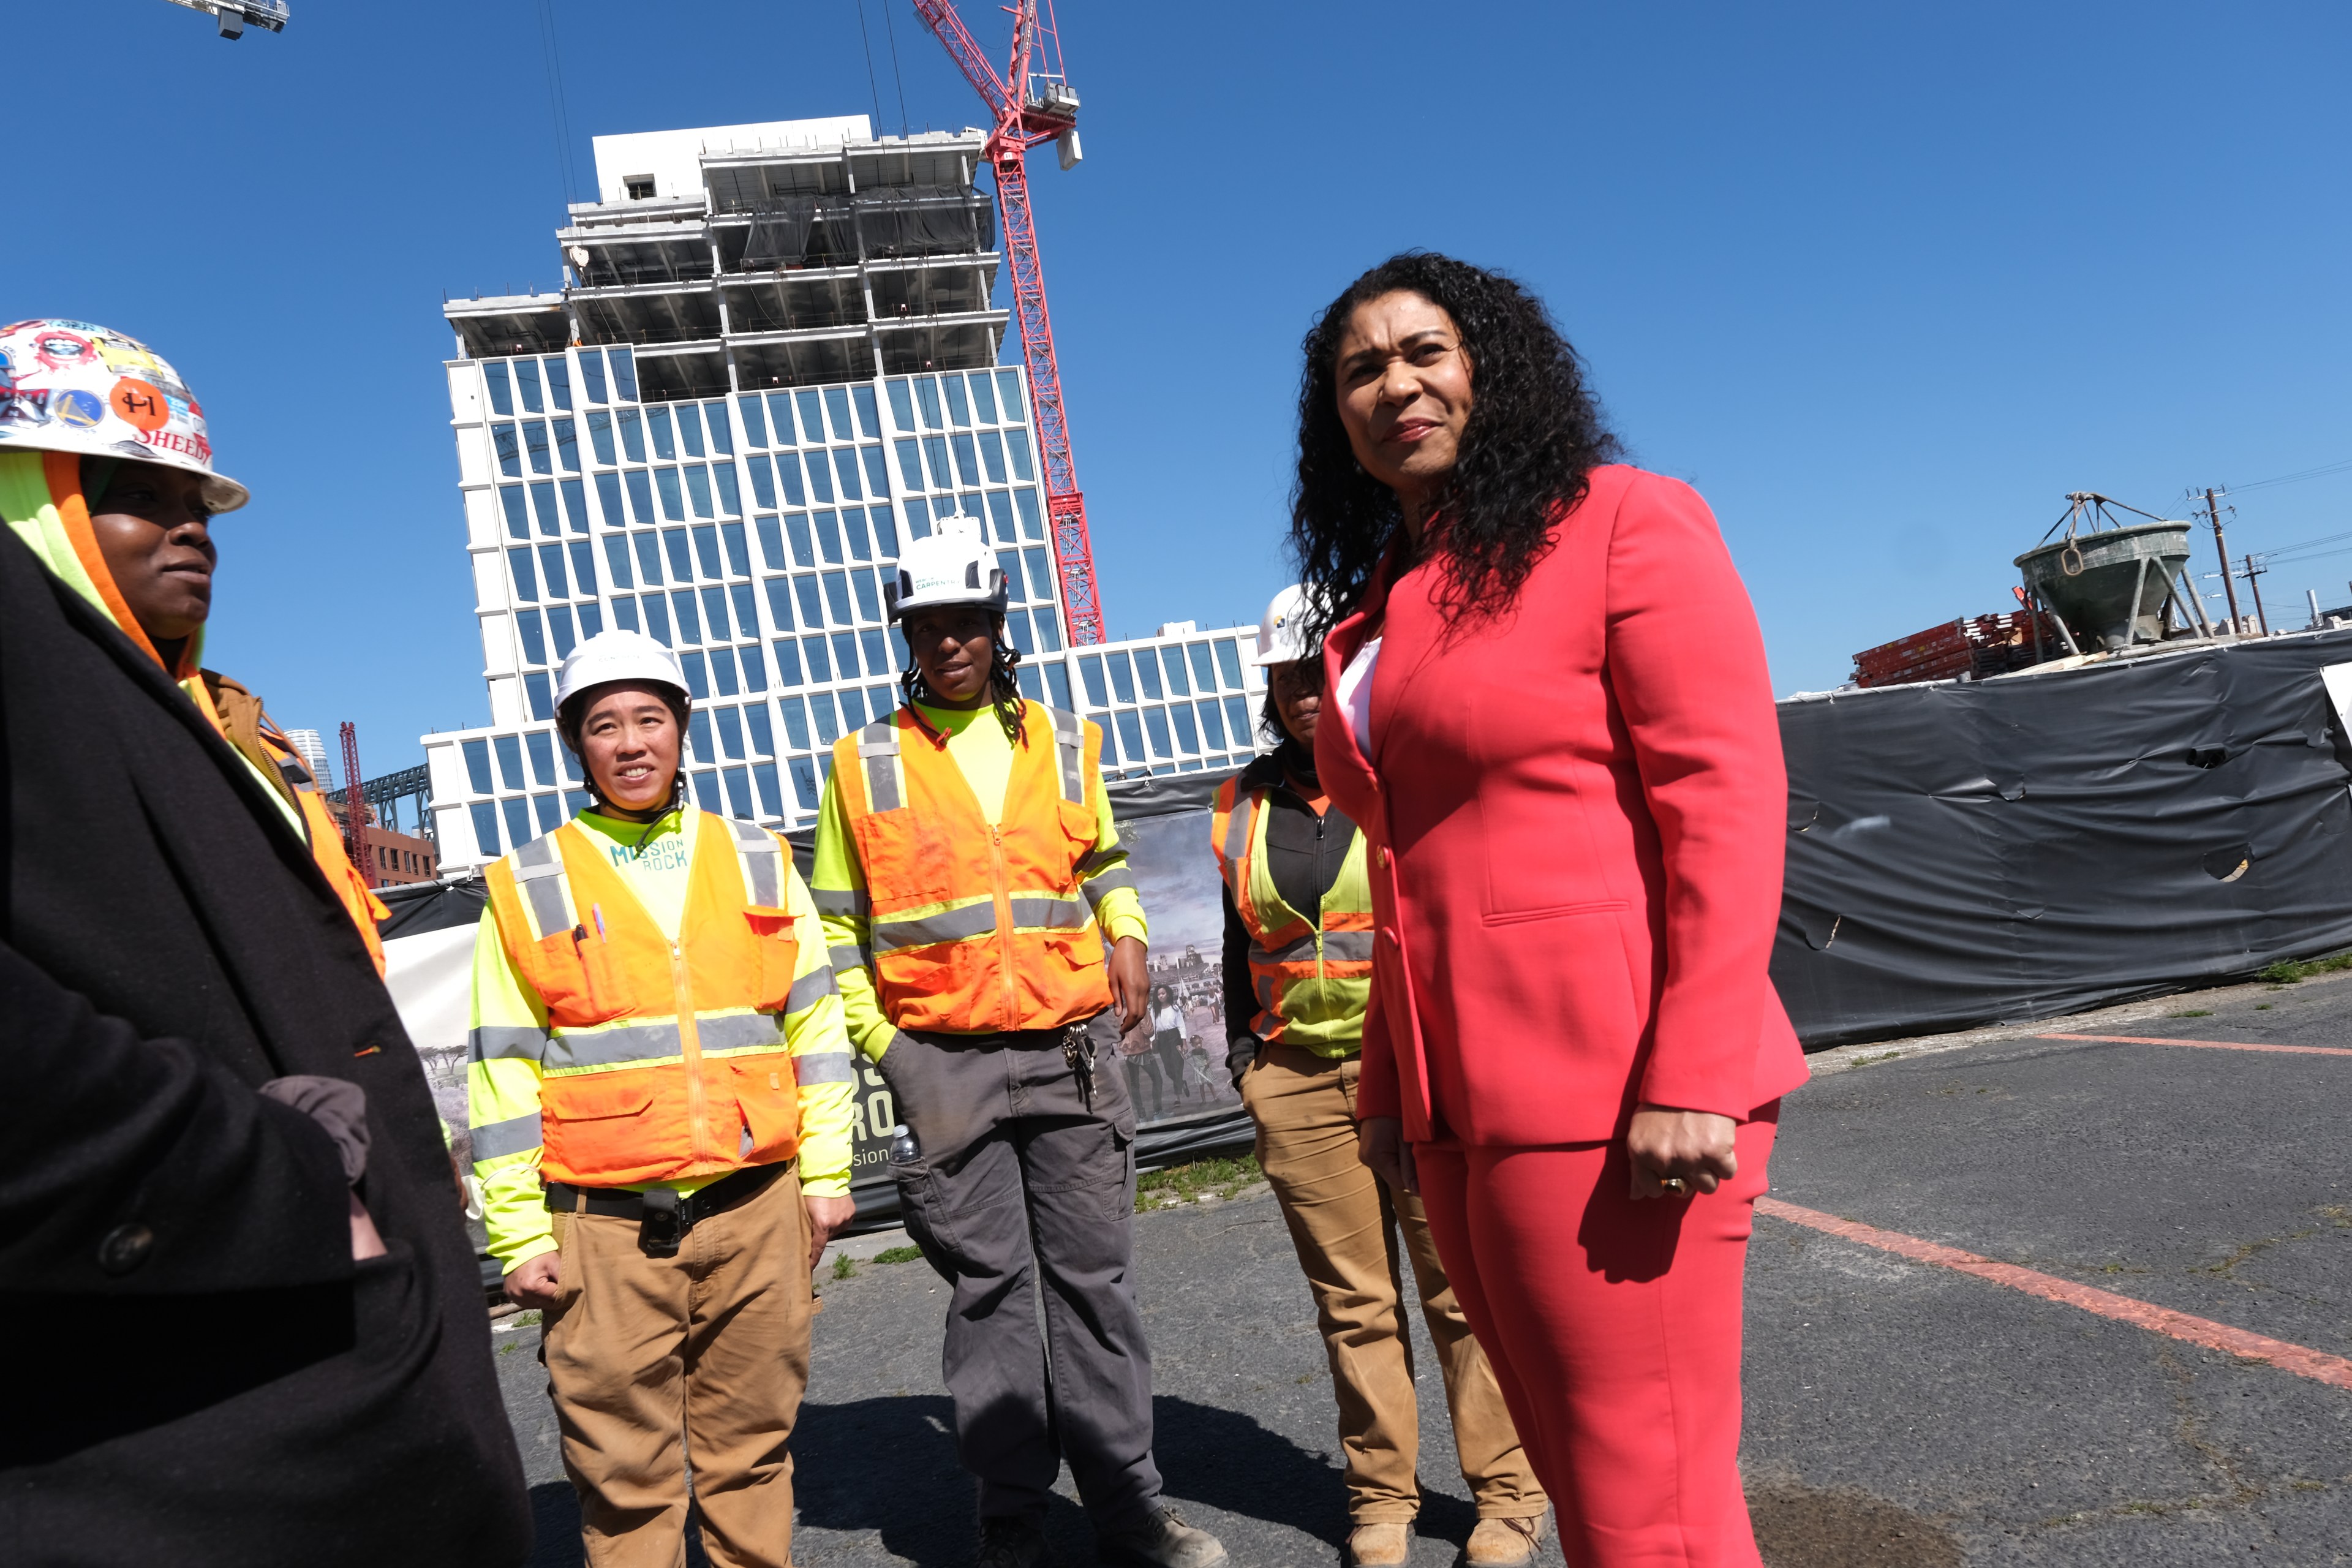 Mayor London Breed talks with workers.